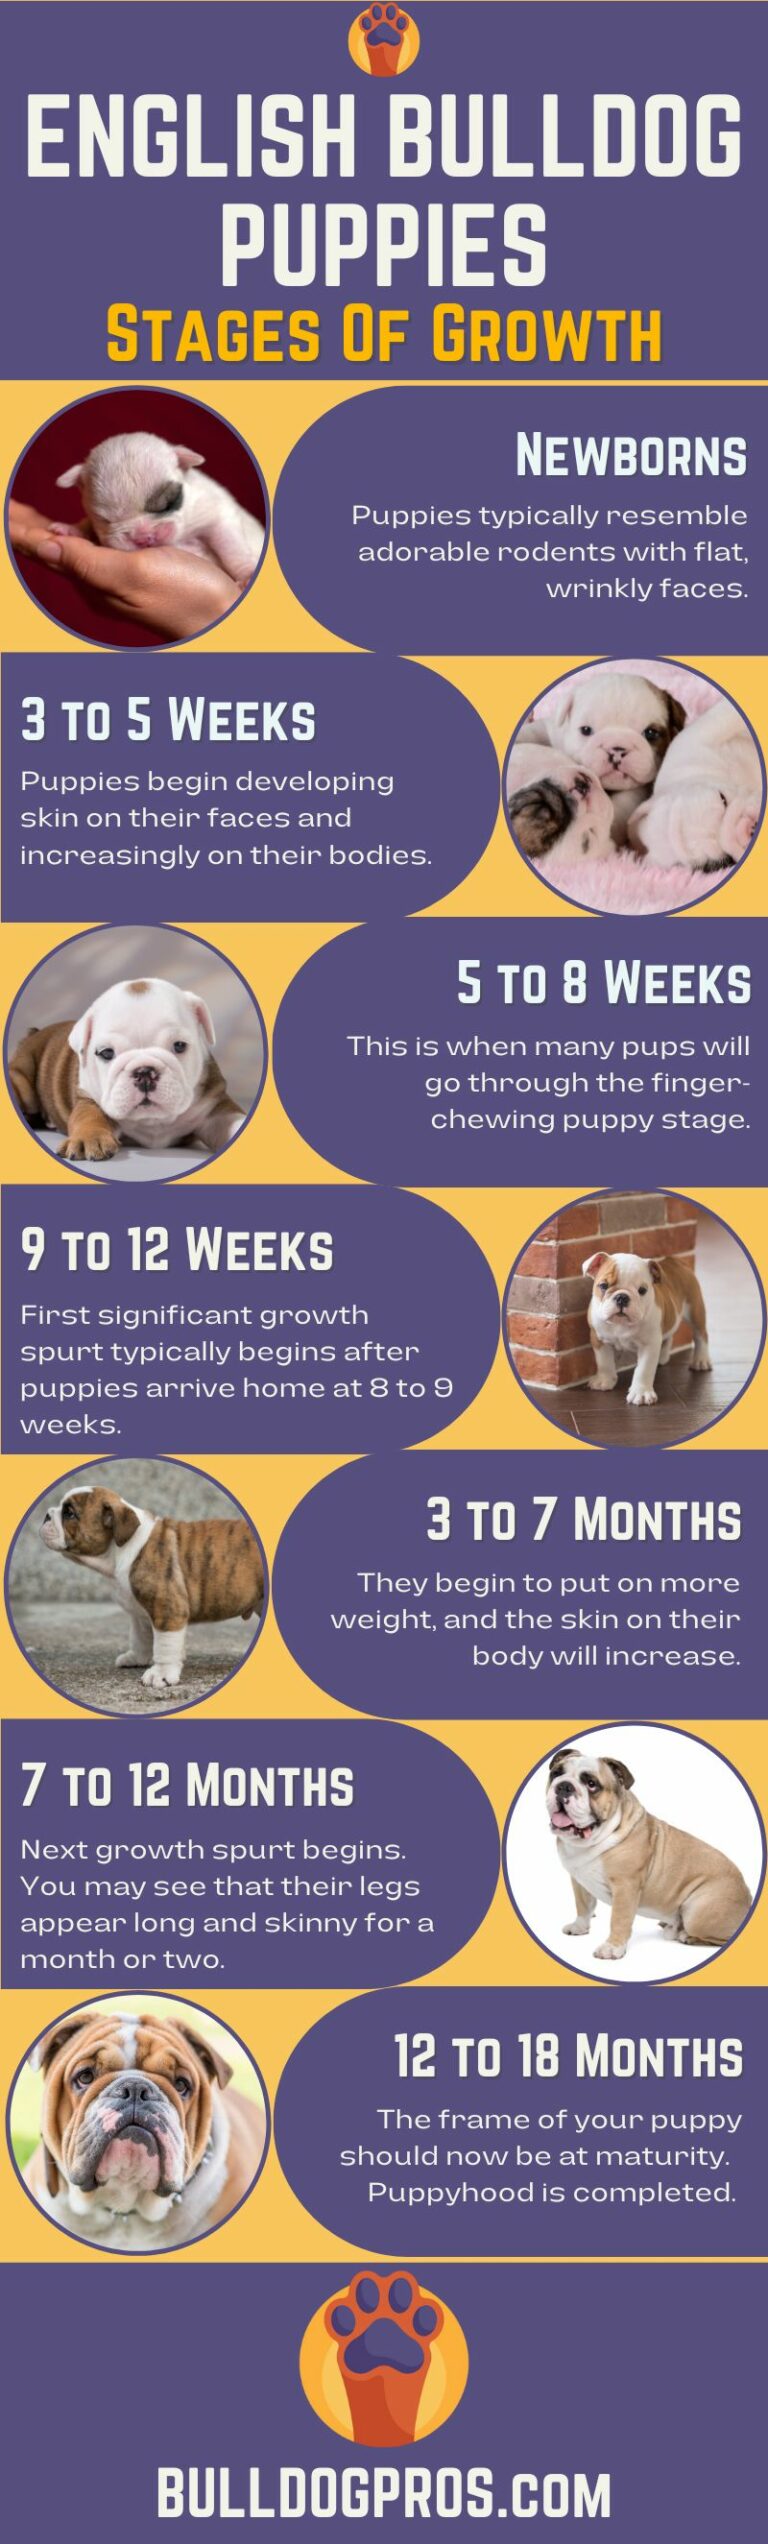 English Bulldog Puppies: Stages Of Growth With Growth Chart